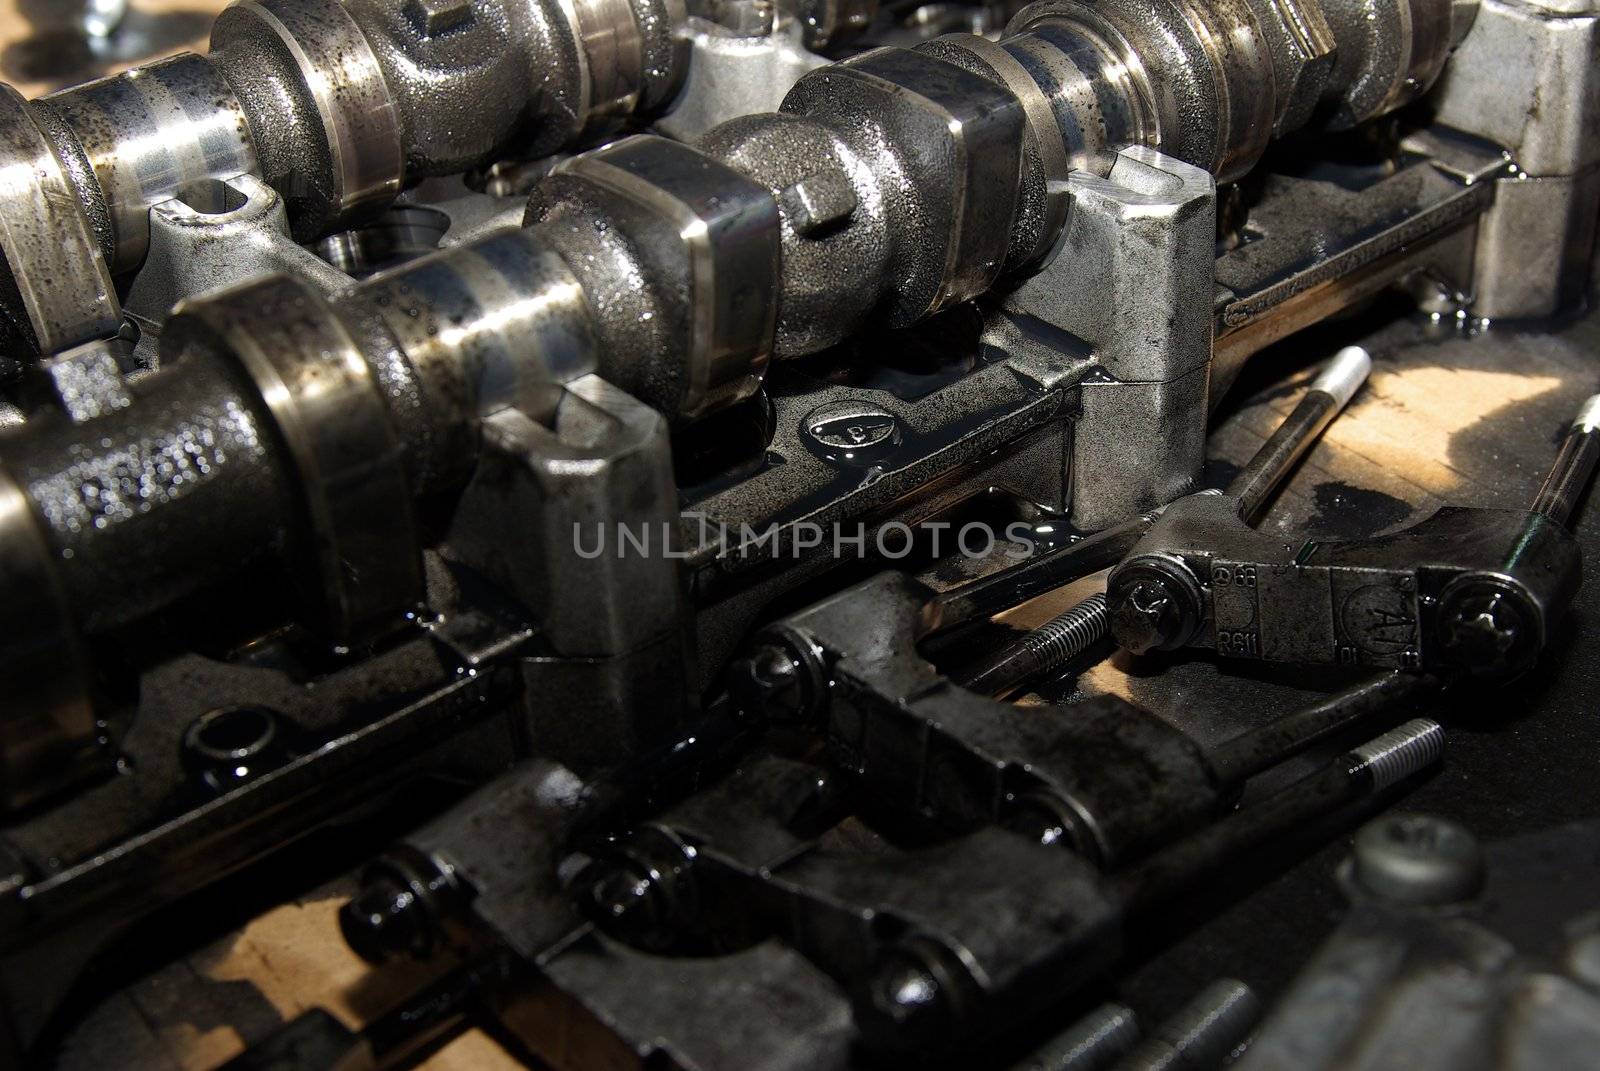 Camshaft from a LKV